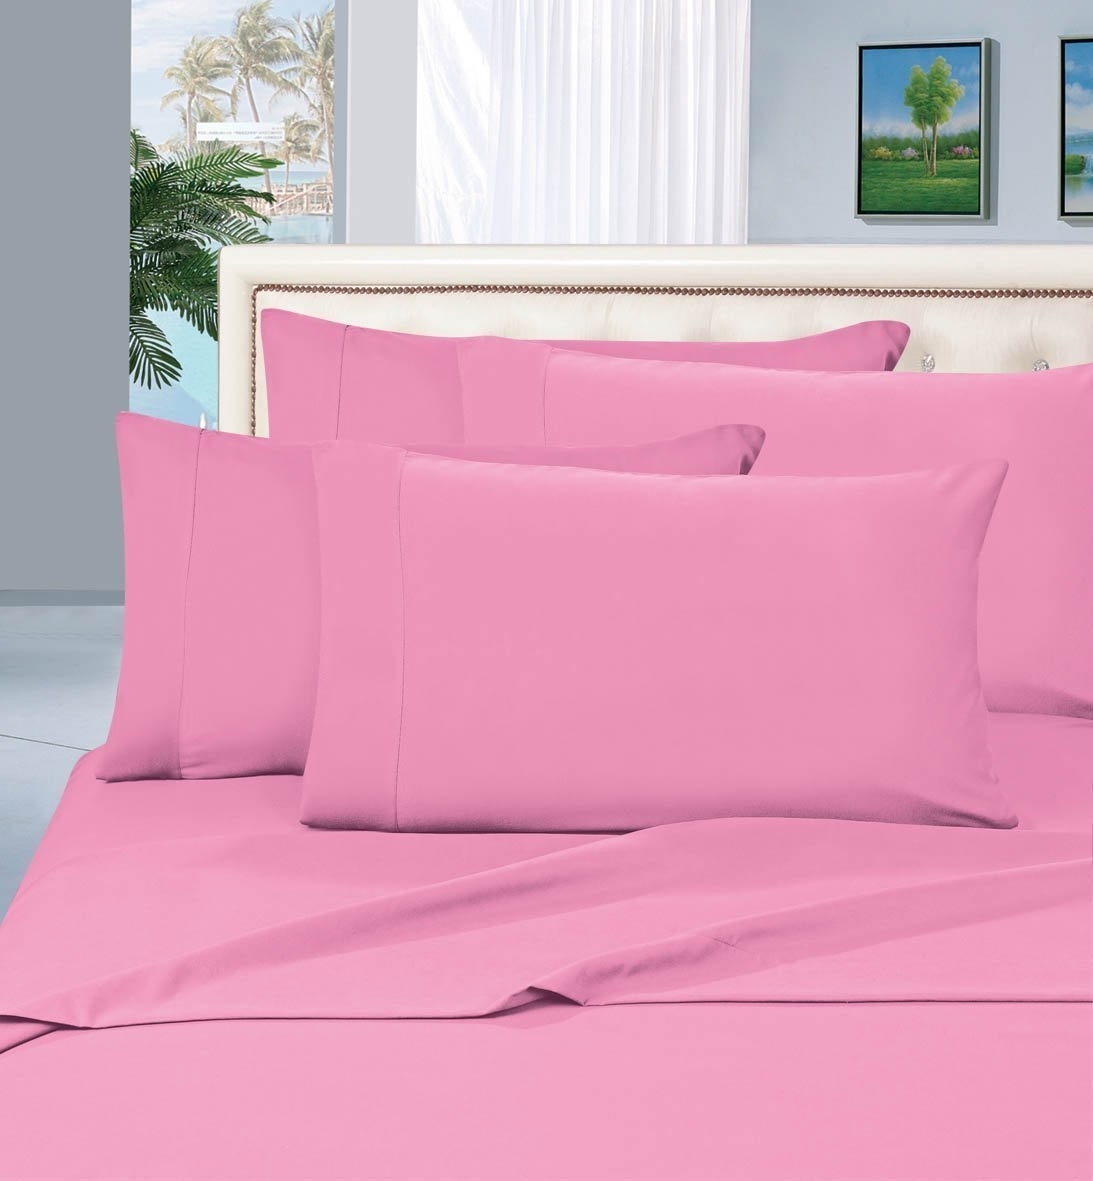 Elegant Comfort 1500 Series Wrinkle Resistant Egyptian Quality Hypoallergenic Ultra Soft Luxury 4-piece Bed Sheet Set, Queen, Light Pink